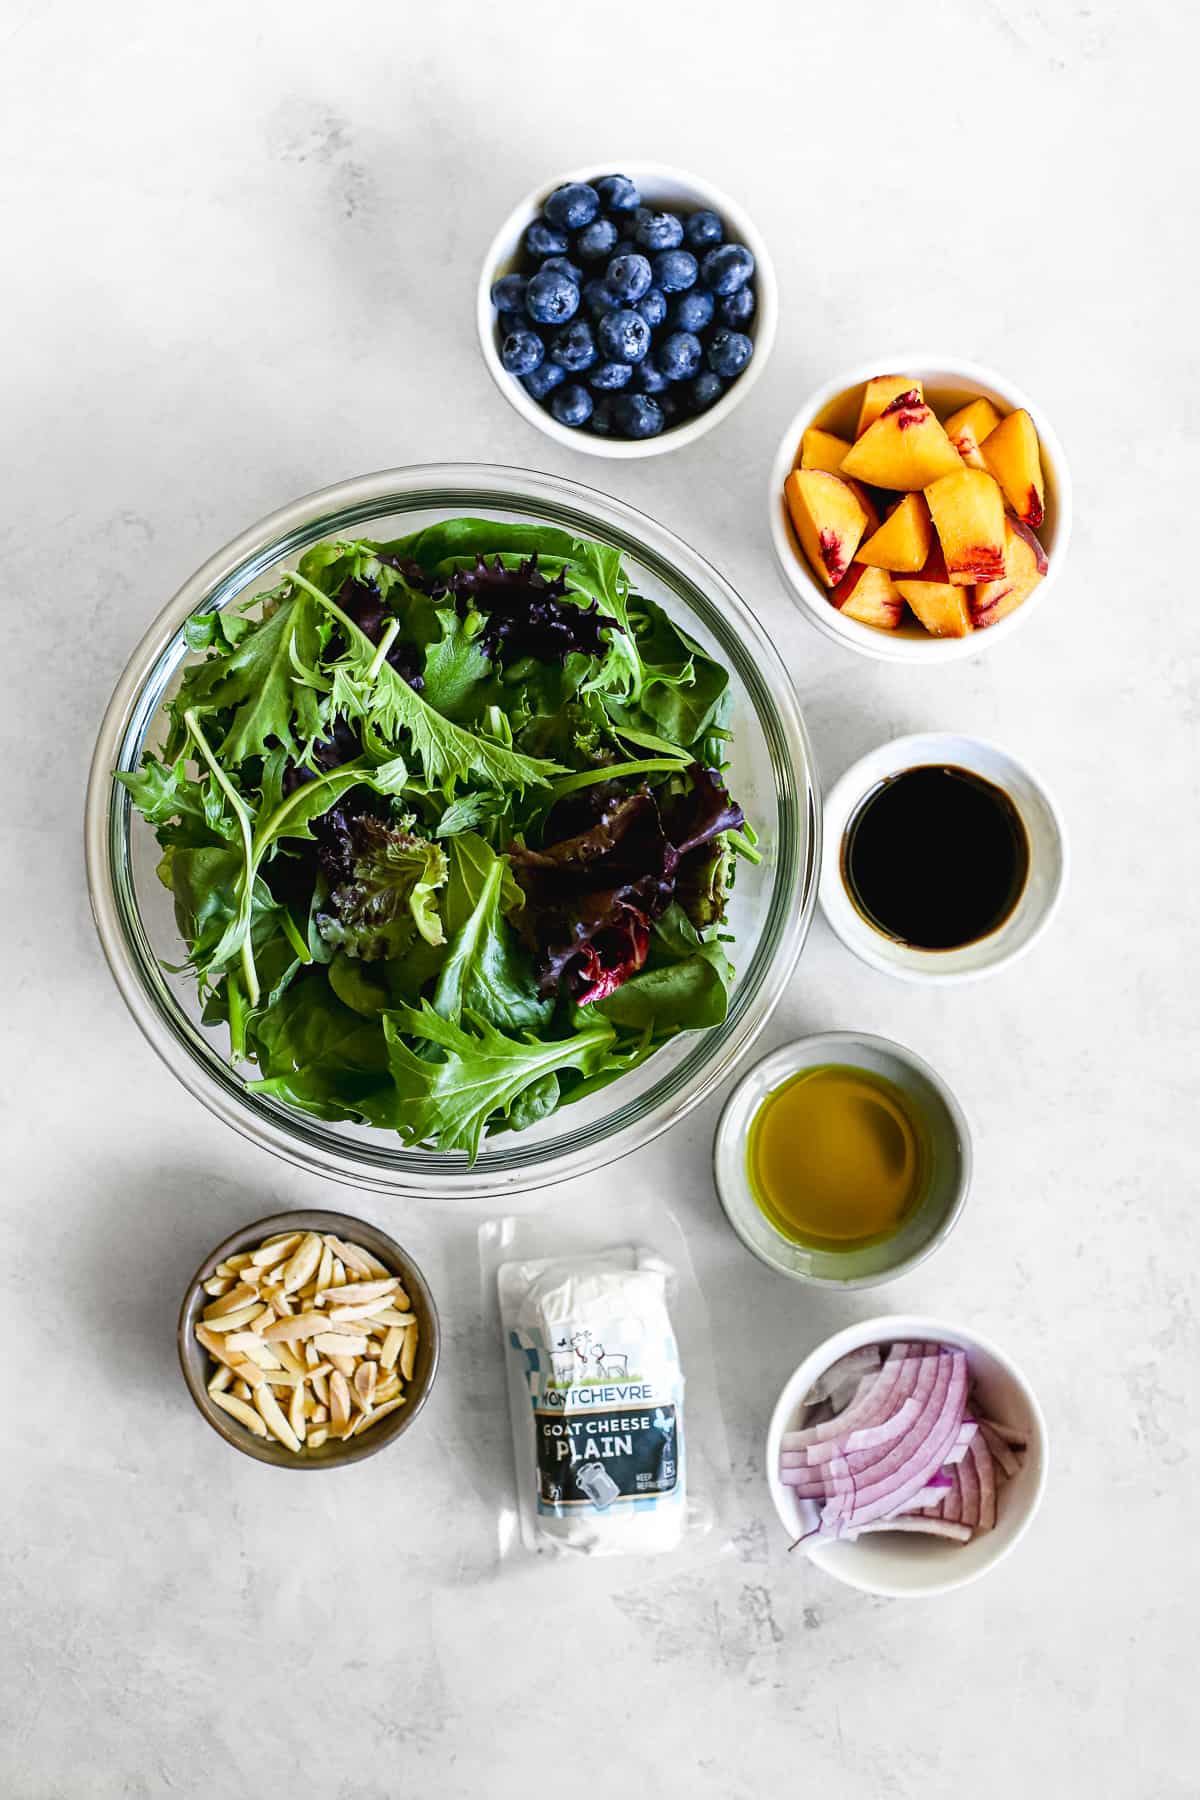 Mixed greens, blueberries, diced peaches, slivered almonds, goat cheese, red onions, aged balsamic, and olive oil measured into individual bowls